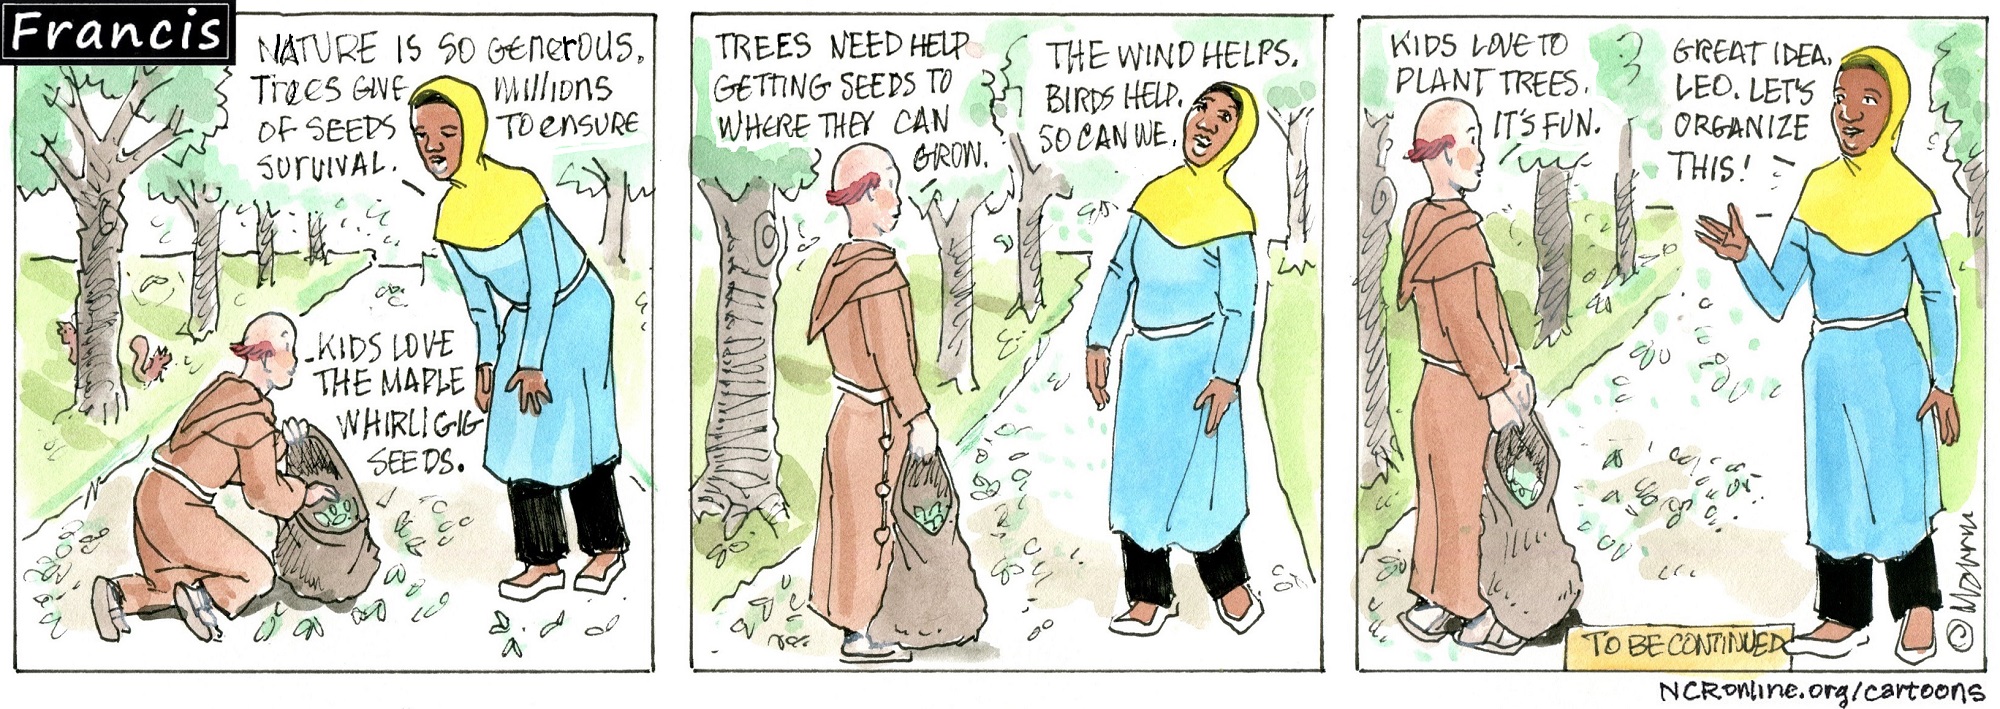 Francis, the comic strip: Brother Leo and Gabby talk about the power of planting seeds.